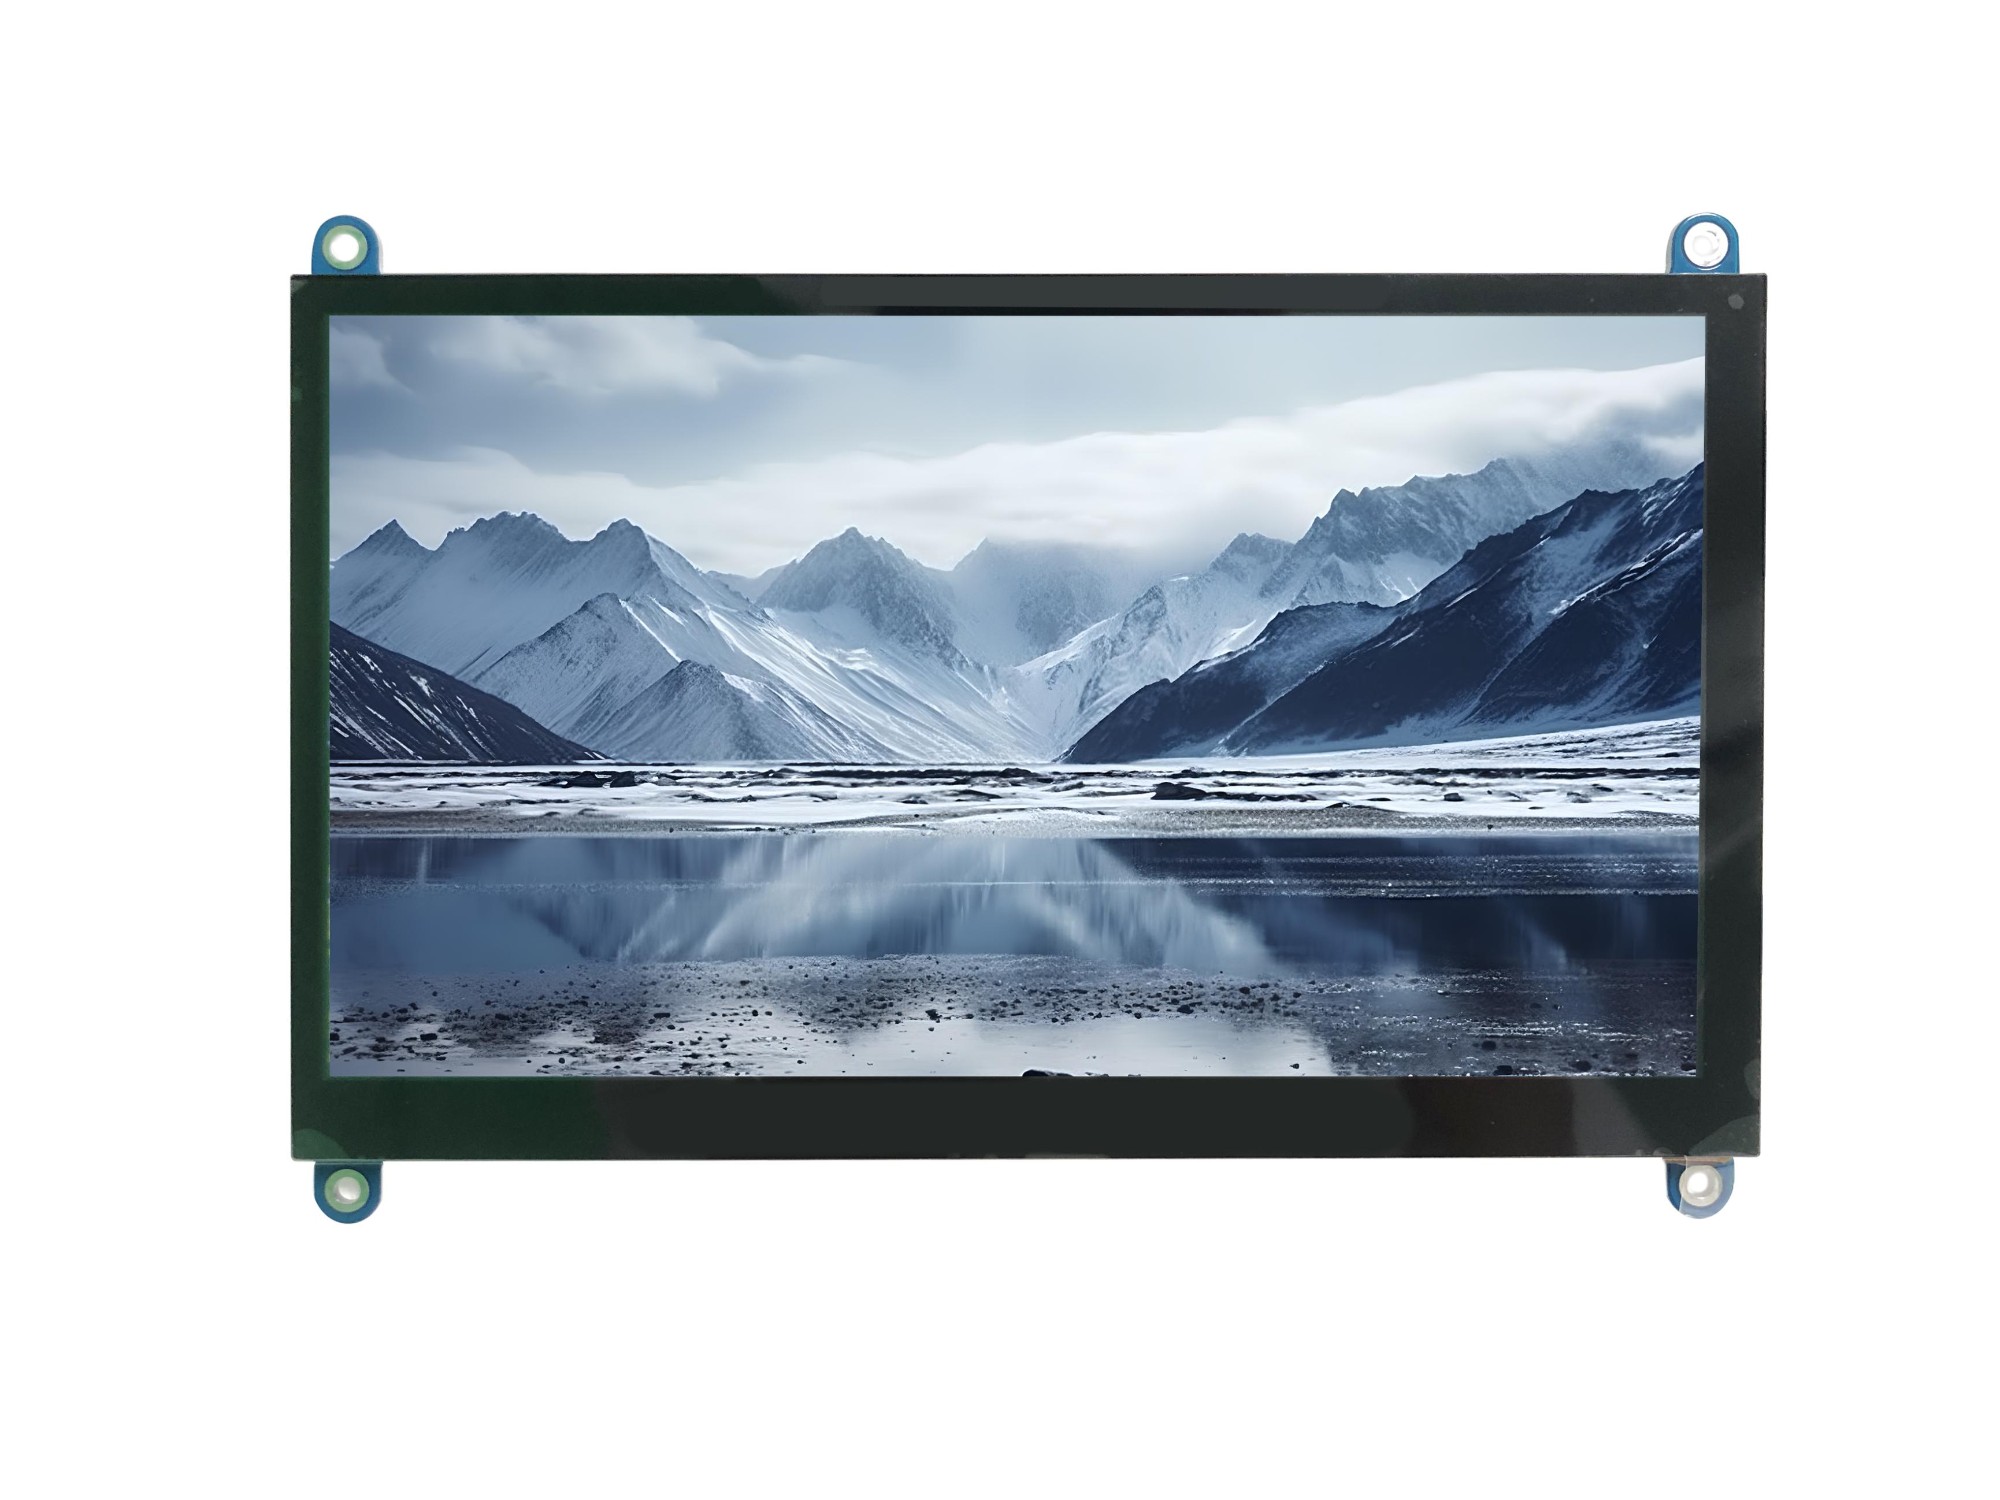 5 inch standard display with HDMI input-800*480